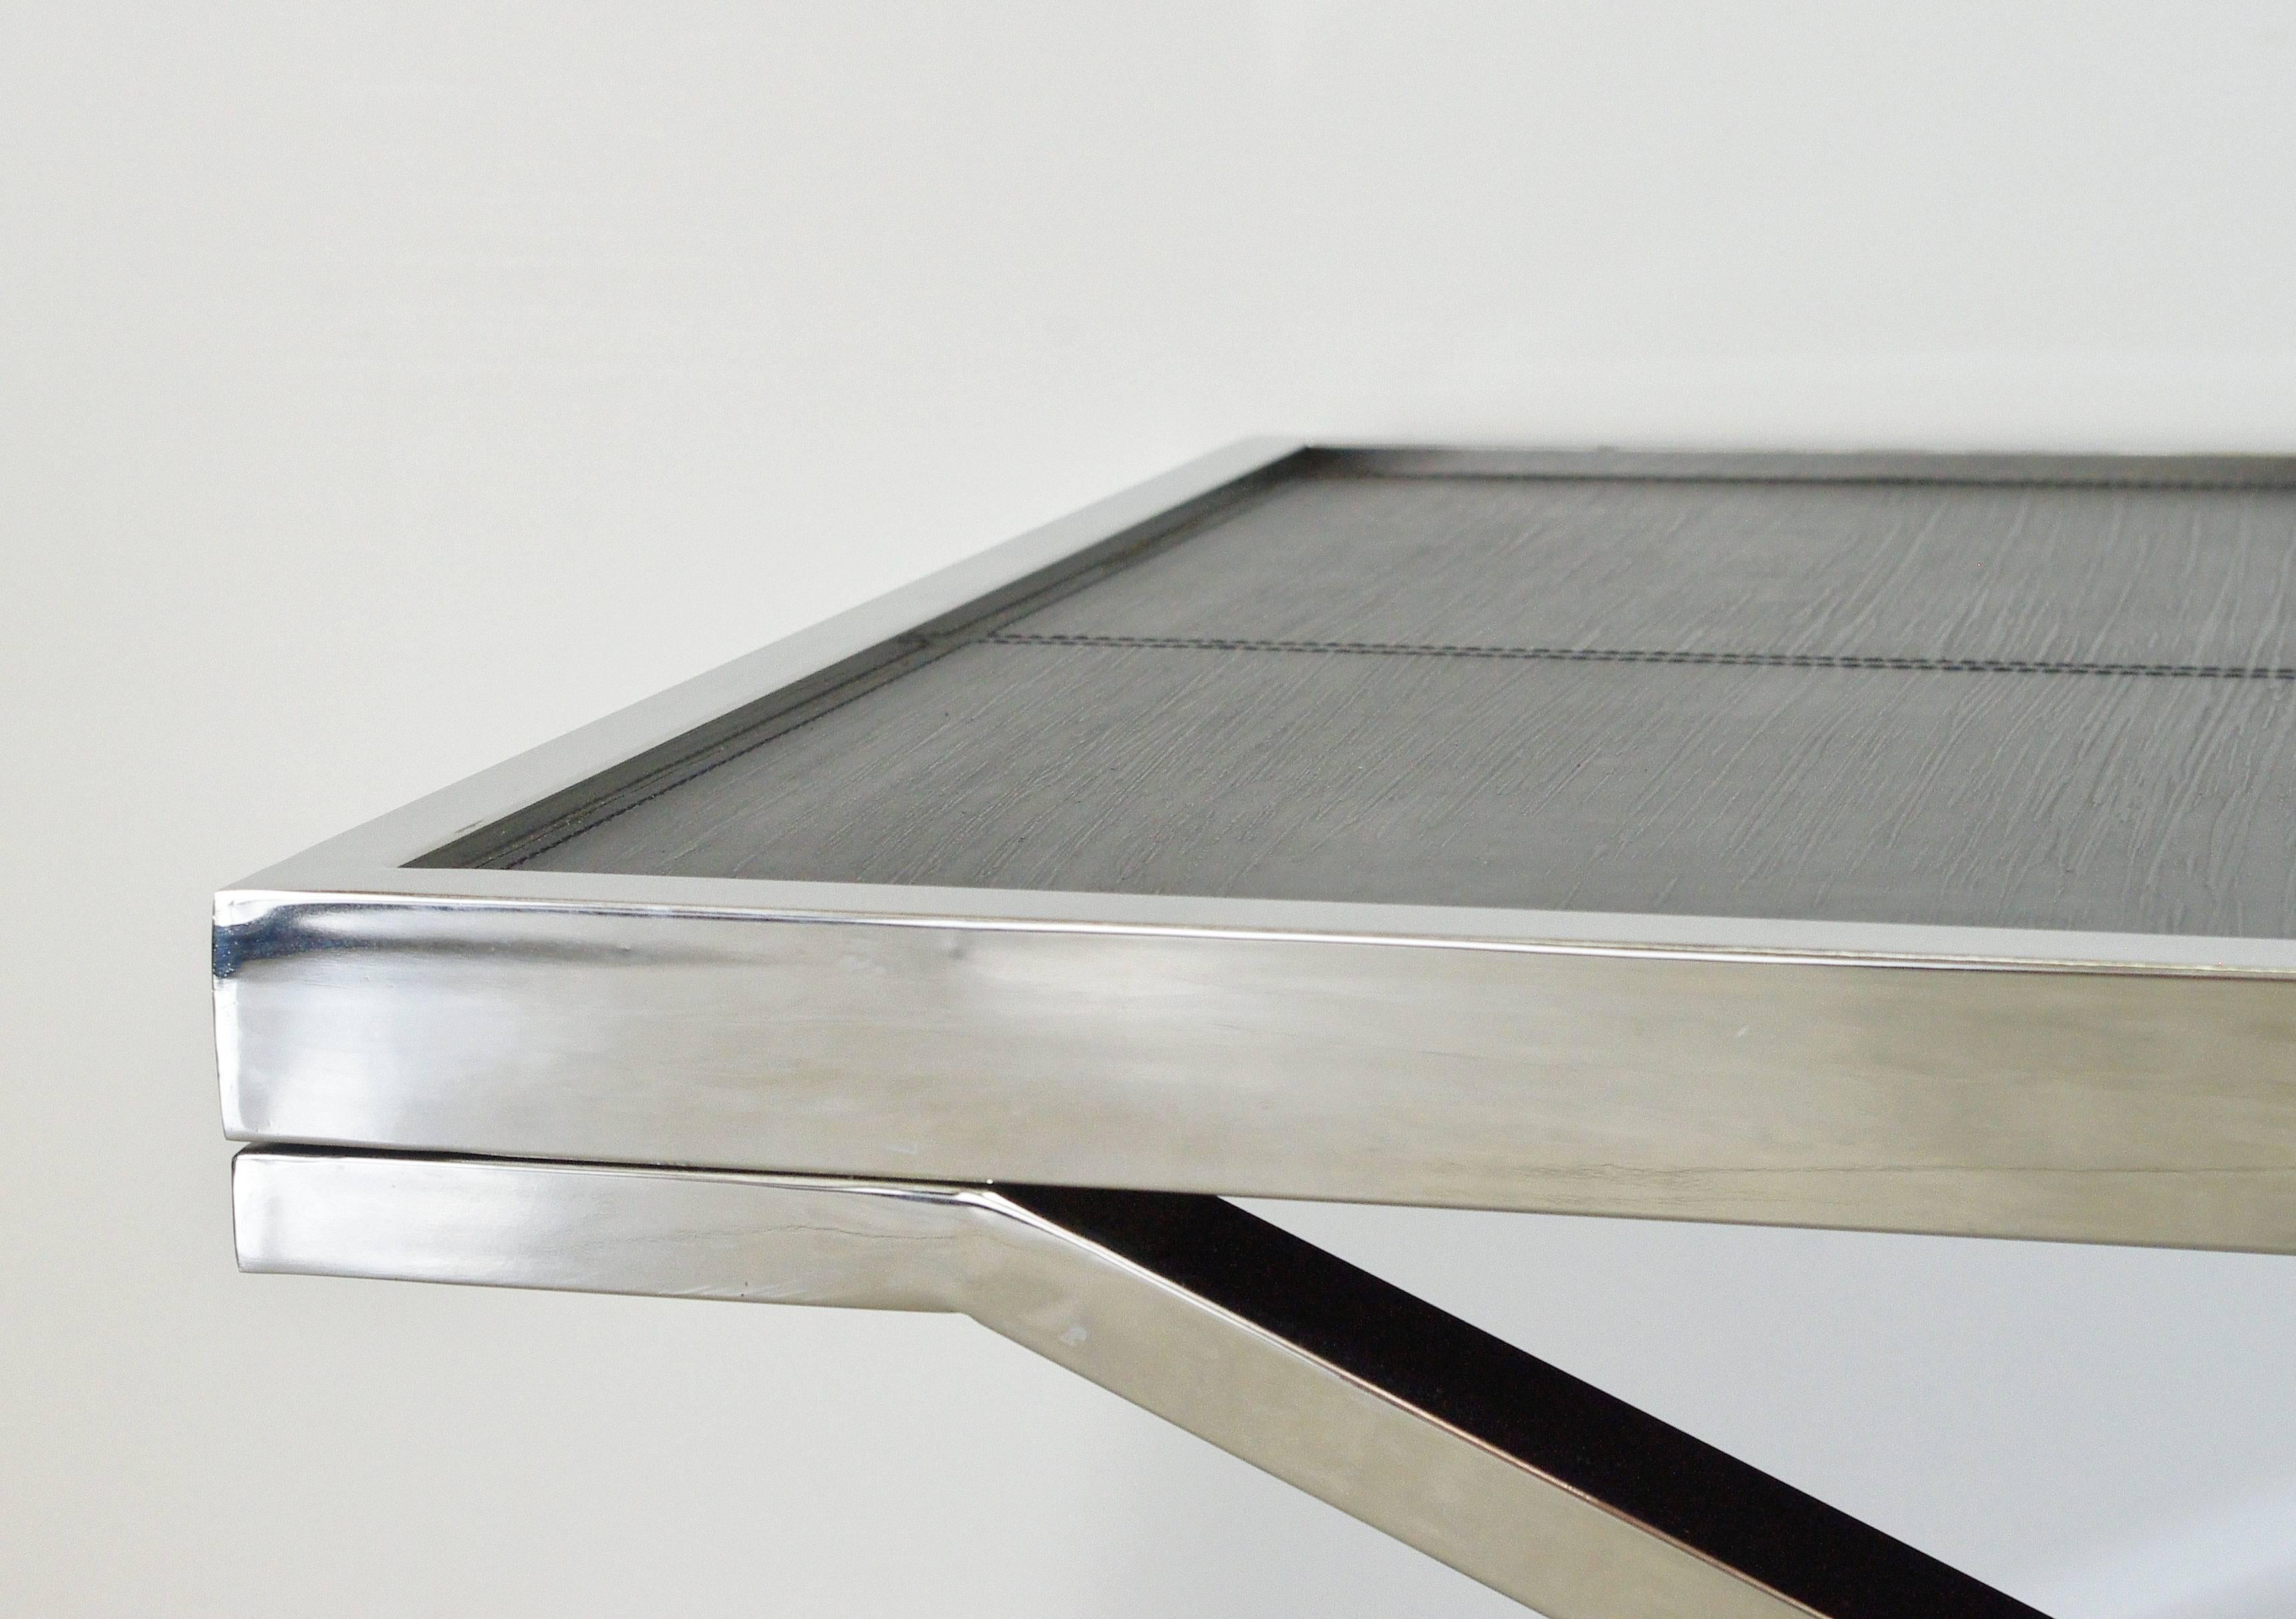 Pressed Black Leather and Stainless Steel Coffee Table by Fabio Ltd FINAL CLEARANCE SALE